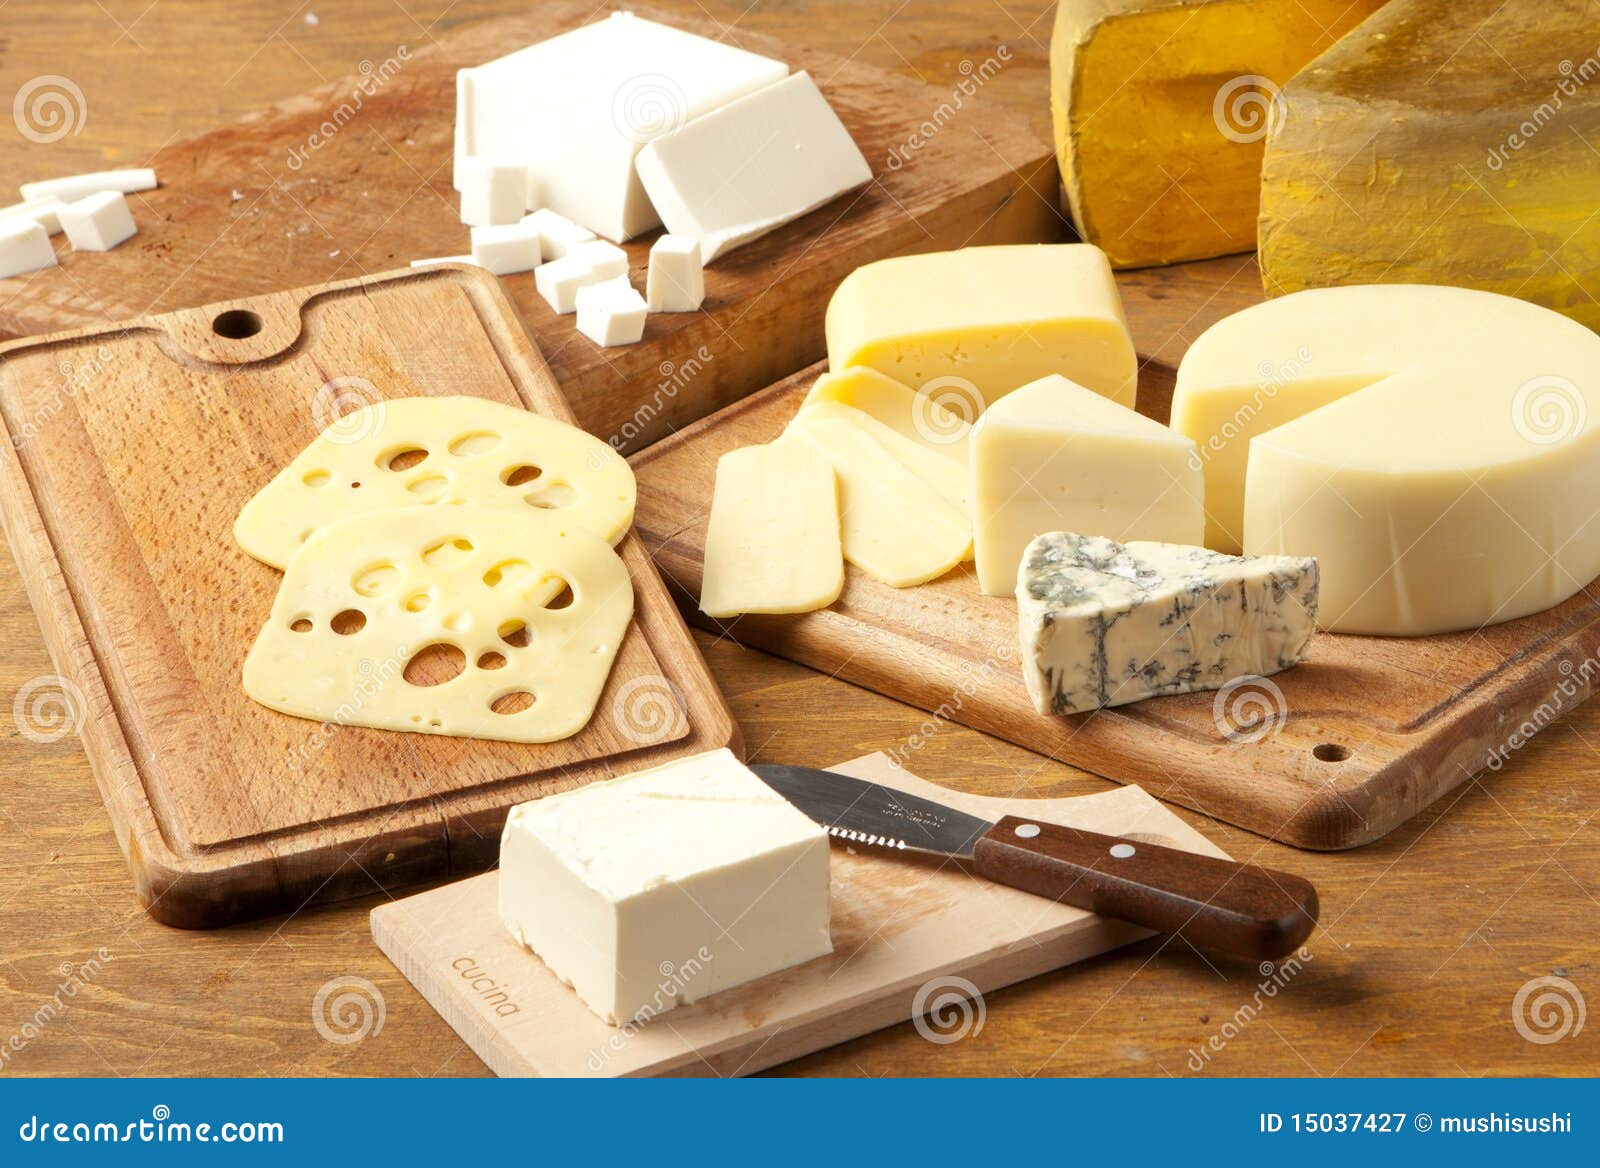 Imported Cheese Royalty Free Stock Photography - Image: 15037427